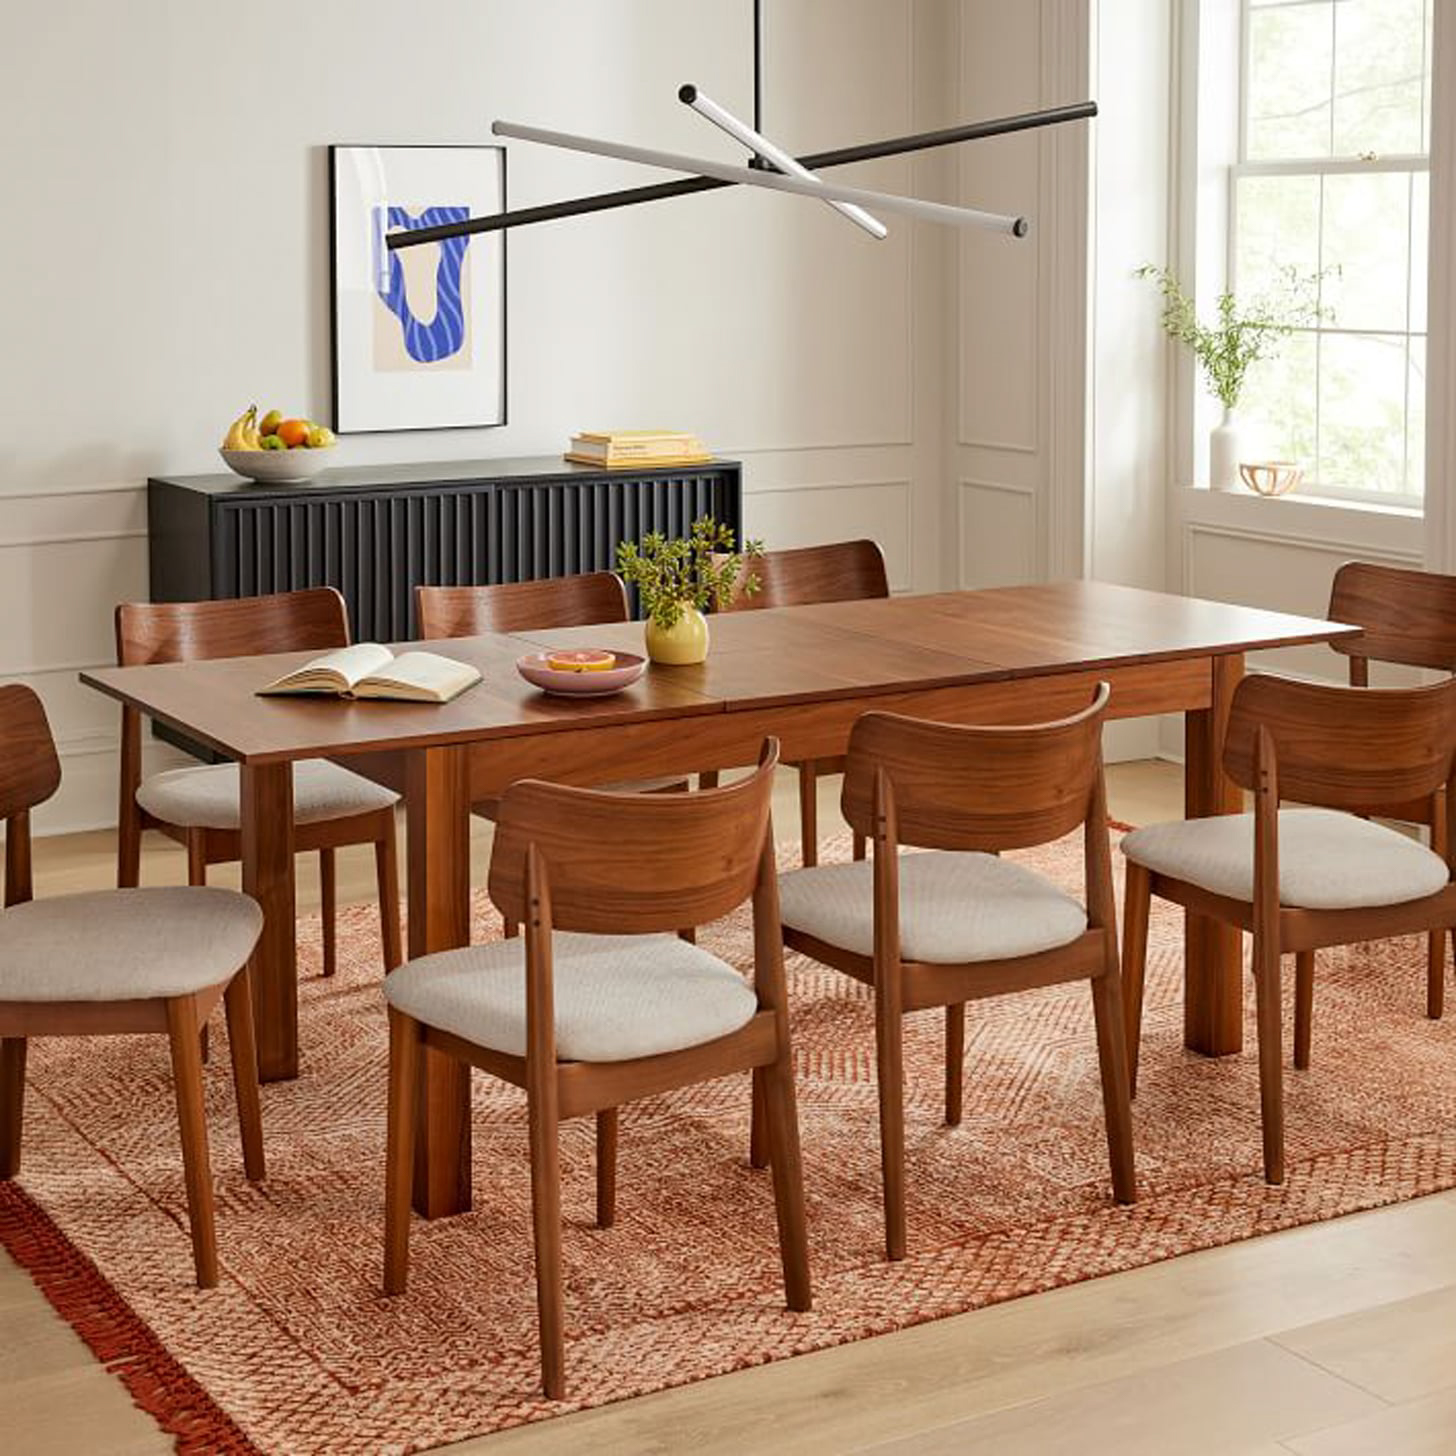 Furnish Your Dining Room with Style and Functionality: Illuminate Your Space with IKEA Lighting.